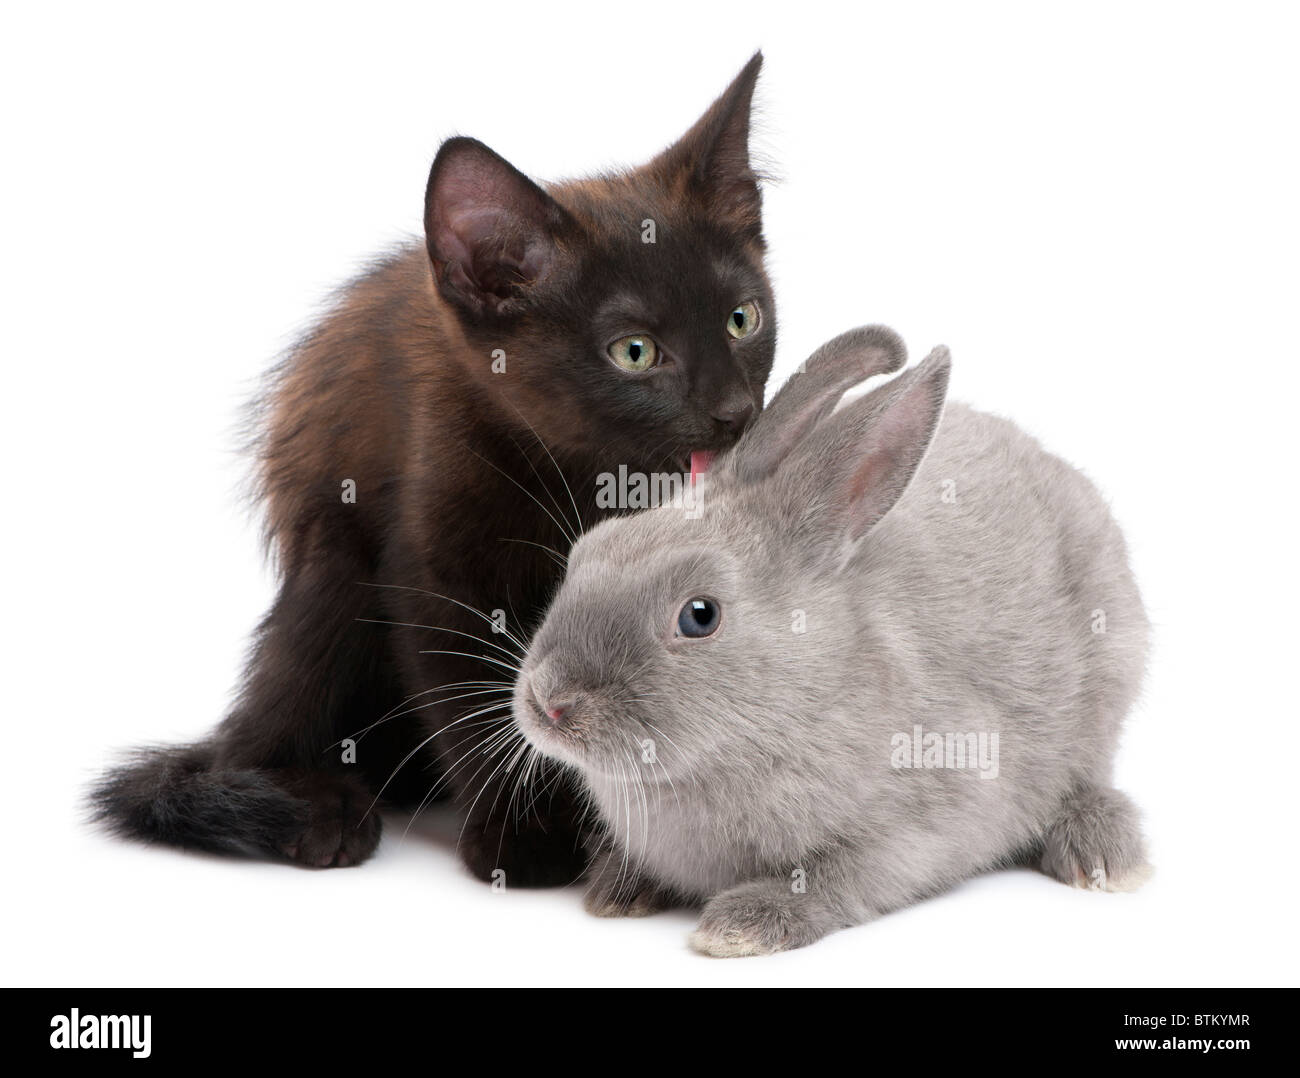 Black kitten playing with rabbit in front of white background Stock Photo